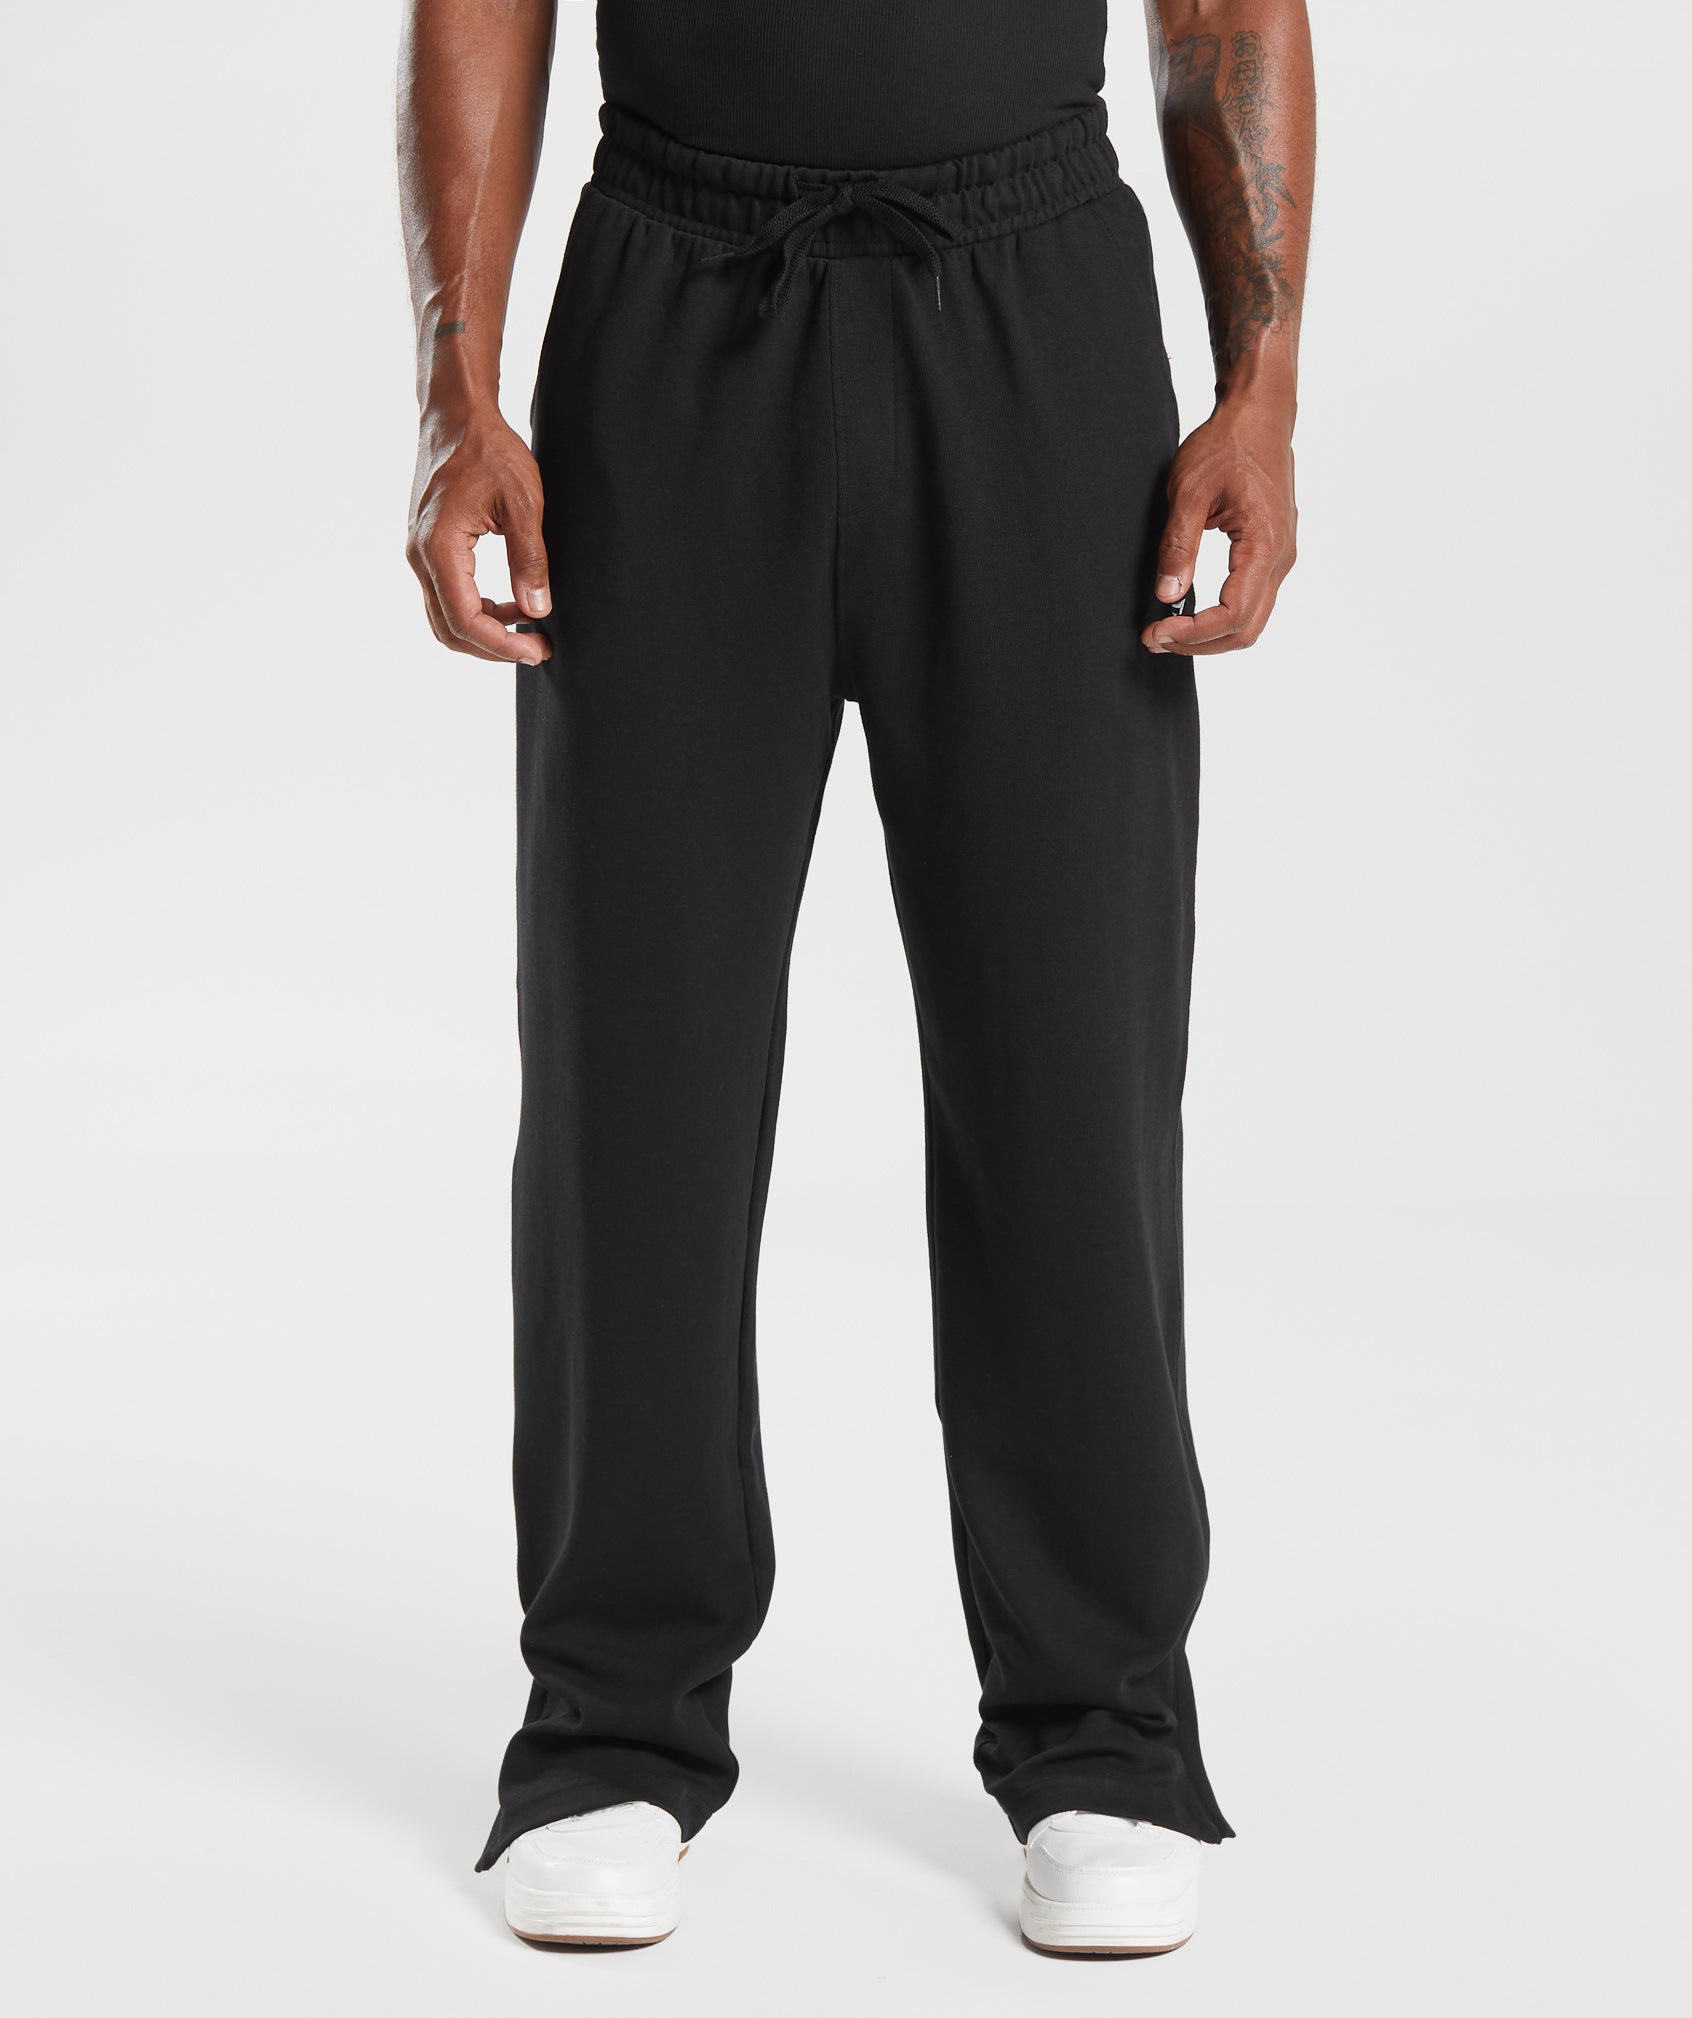 Rest Day Track Pants in Black - view 2